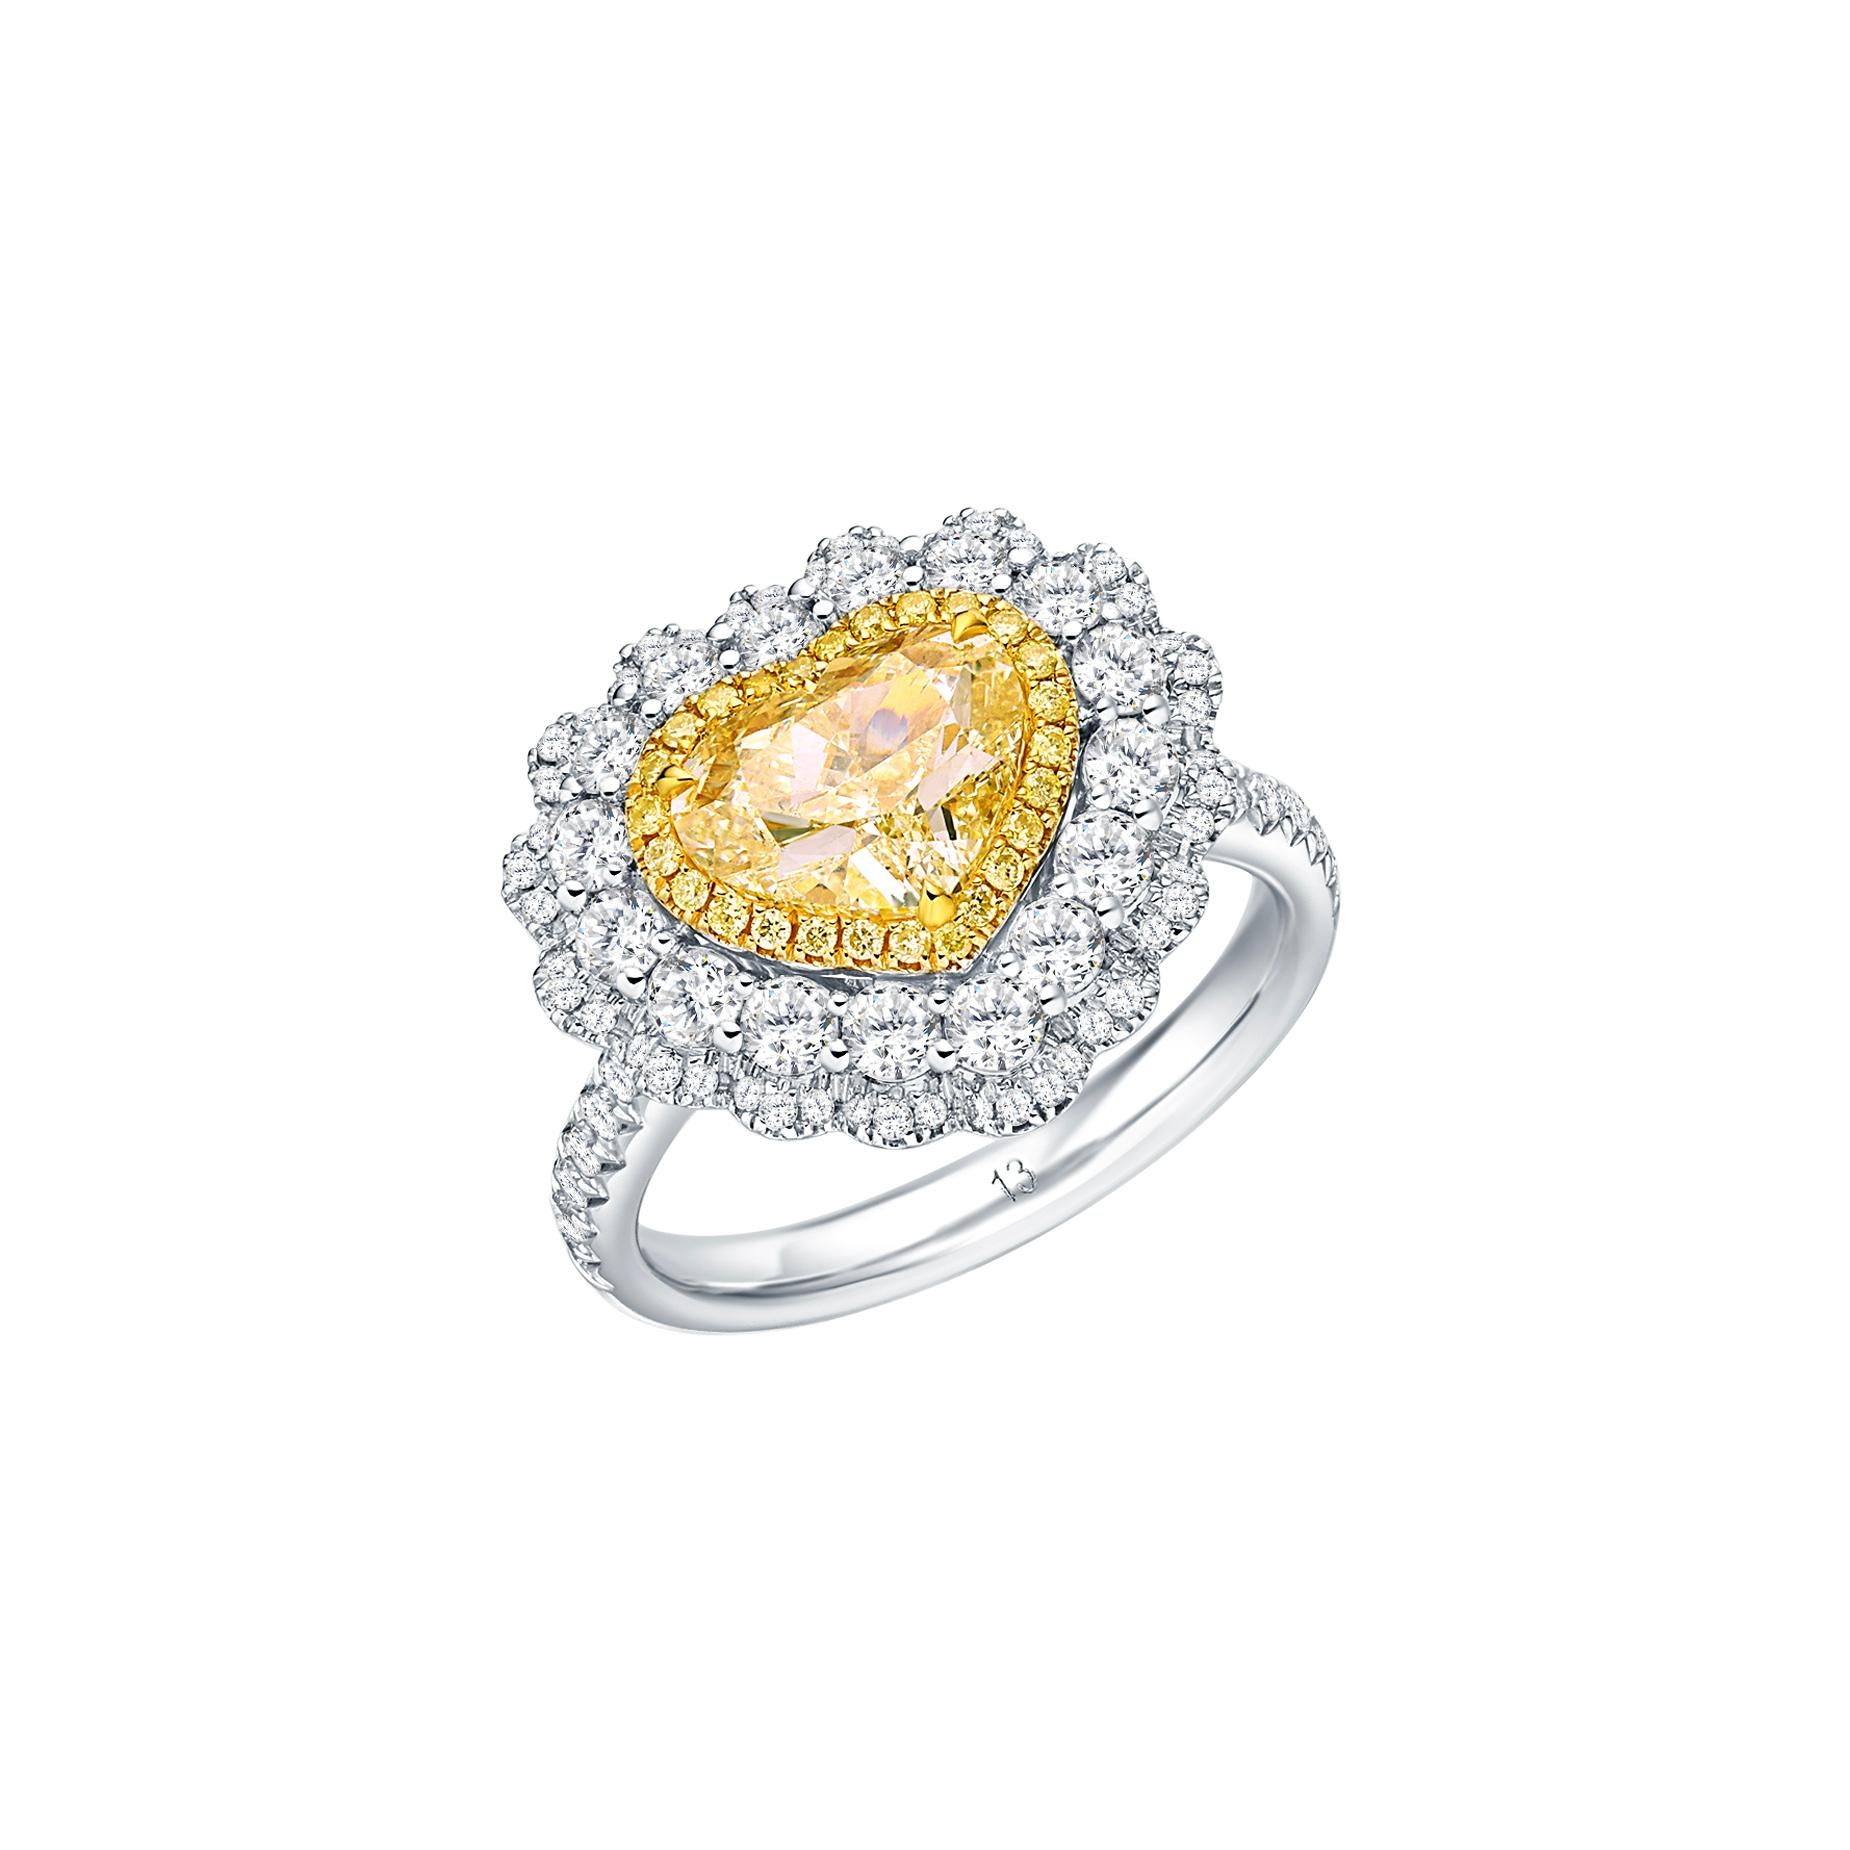 Experience the ultimate expression of elegance and love with this enchanting GIA Certified 2.00 carat Natural Heart Shape U to V Range Diamond Solitaire Ring. Set upon a resplendent 18kt gold band, this exquisite piece encapsulates the timeless